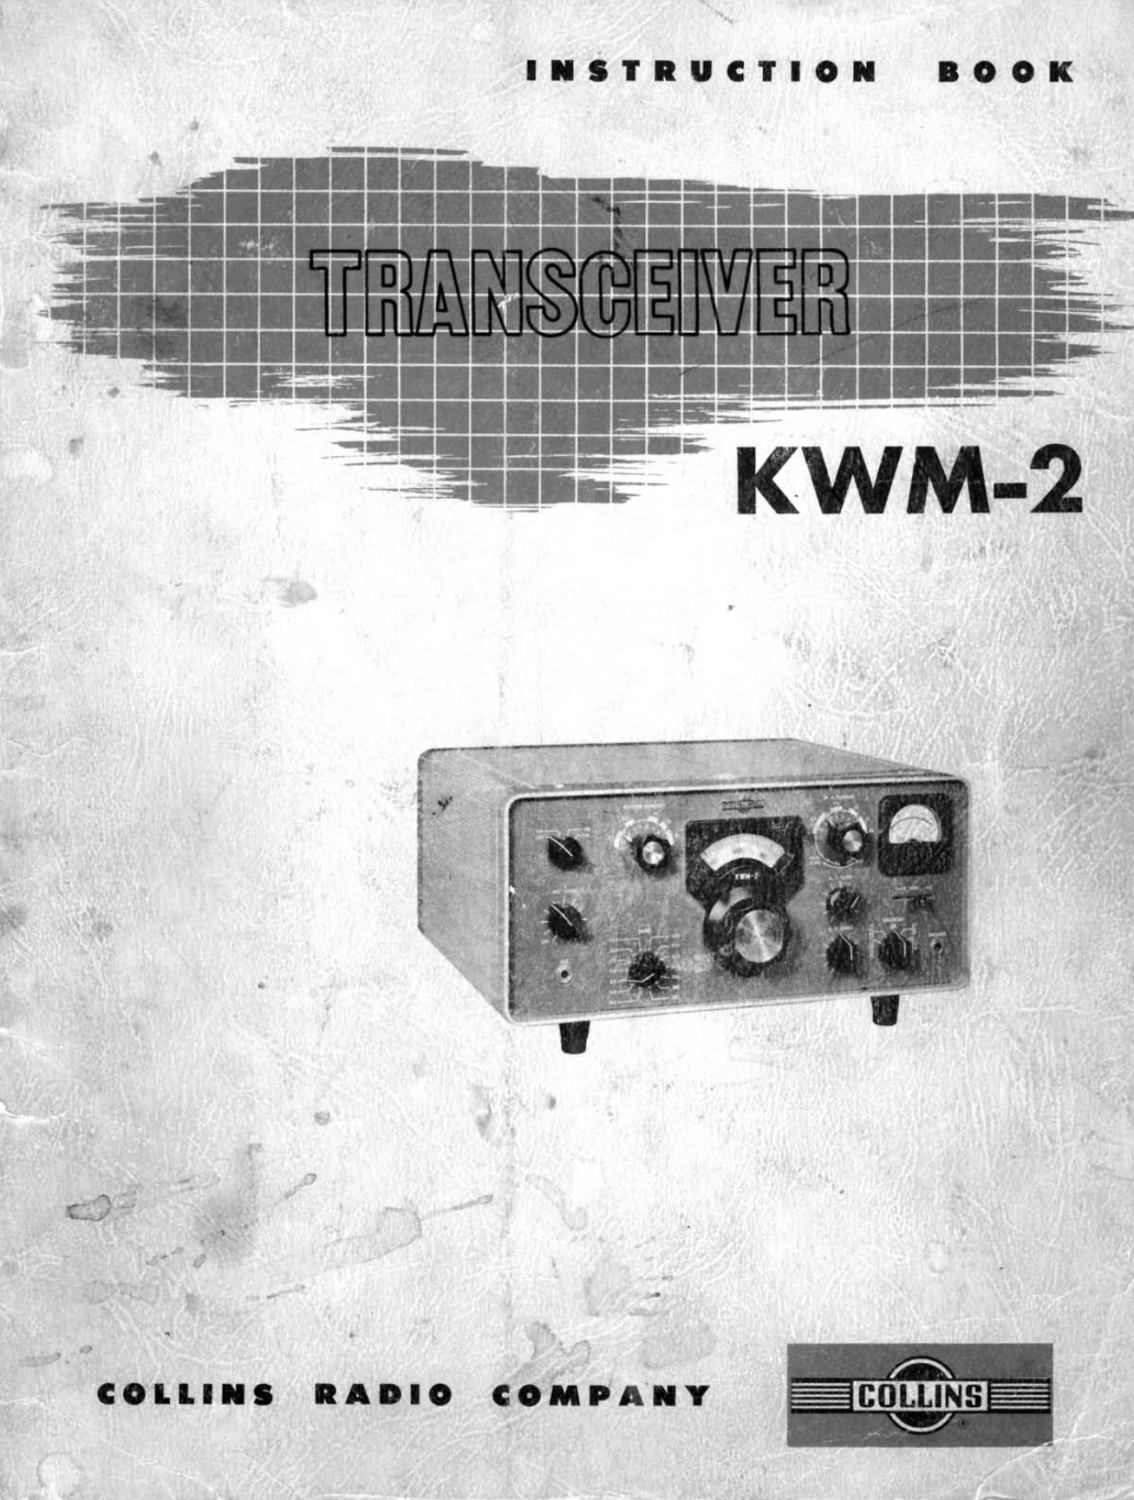 Collins KWM-2 Transceiver - Instruction Book - 3rd Edition (1959-12)